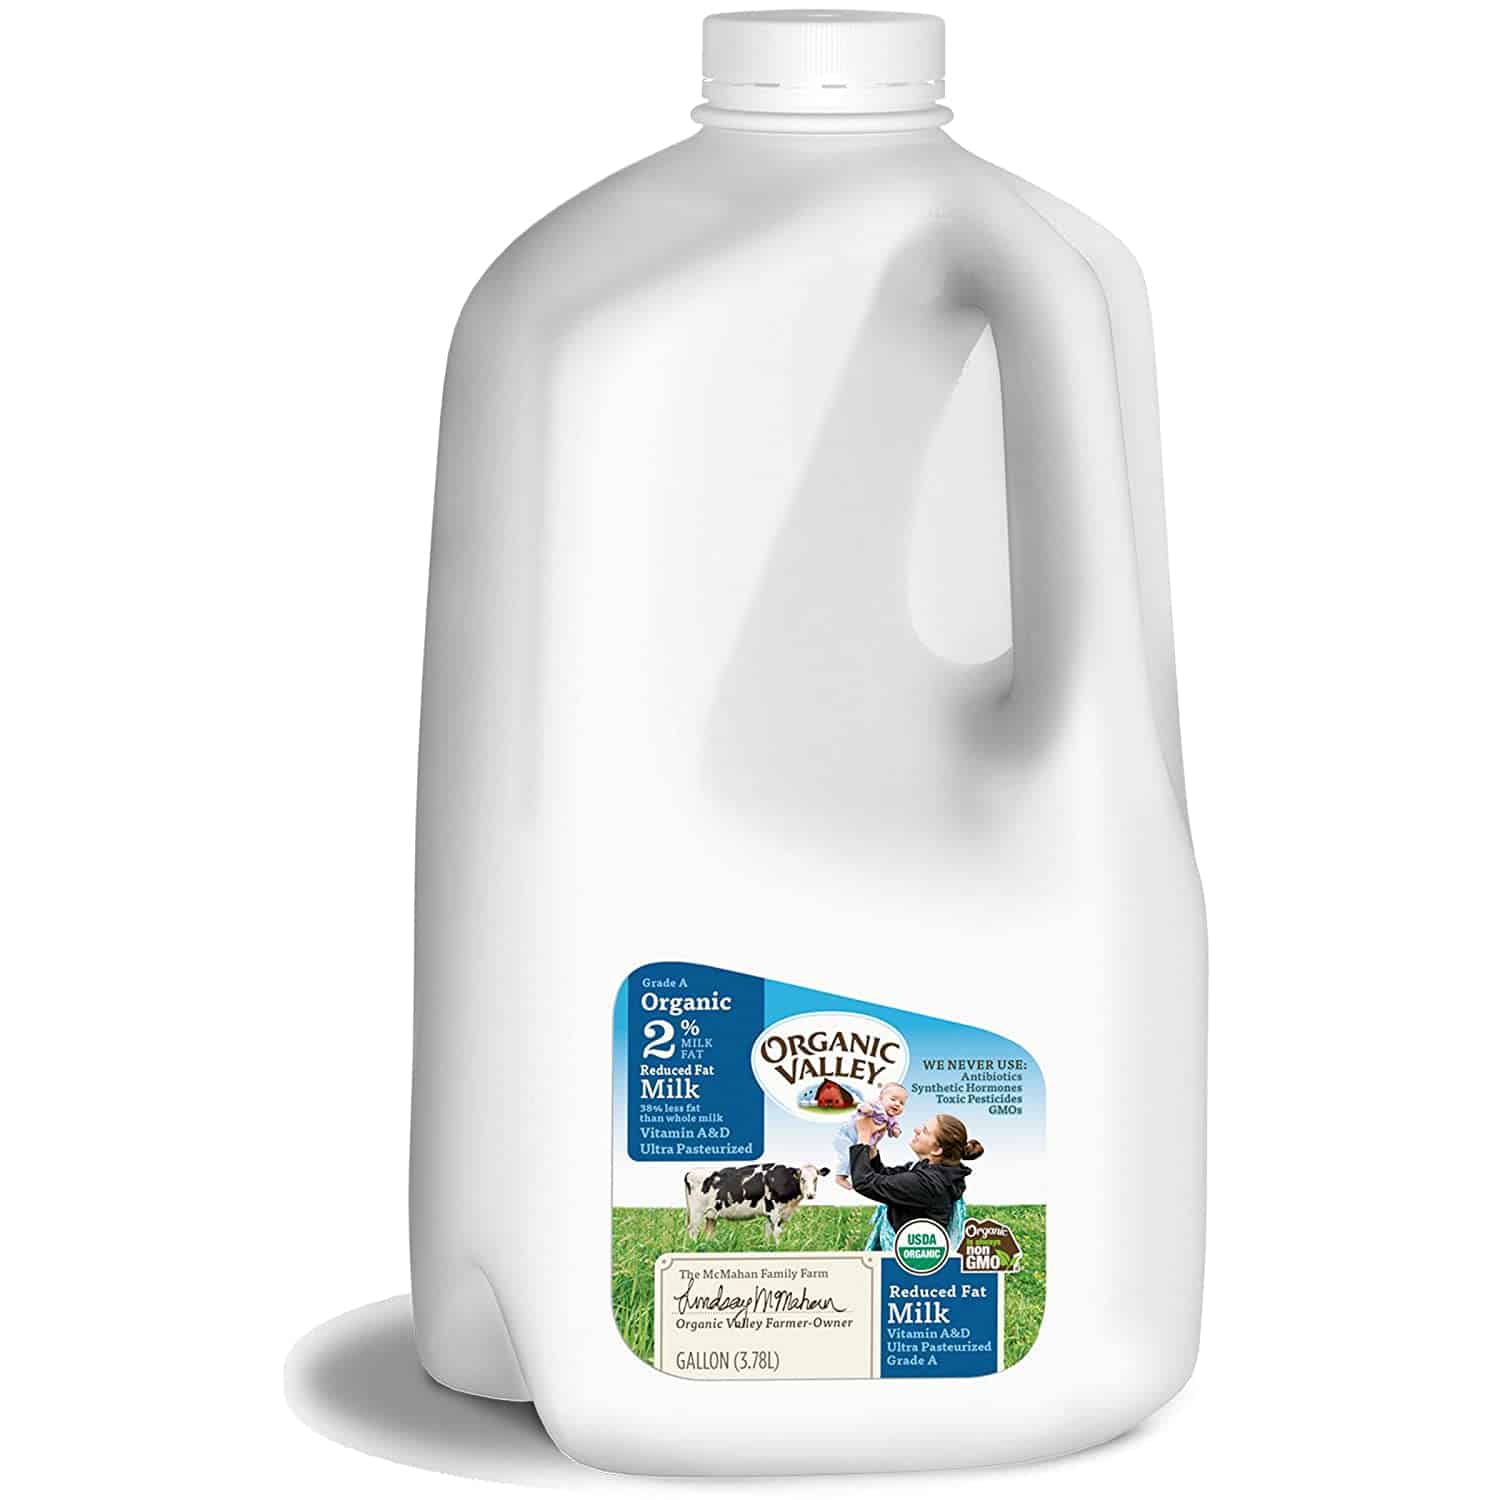 Oasis Fresh 2% Reduced Fat Organic Milk, Organic Valley Ultra Pasteurized Gallon